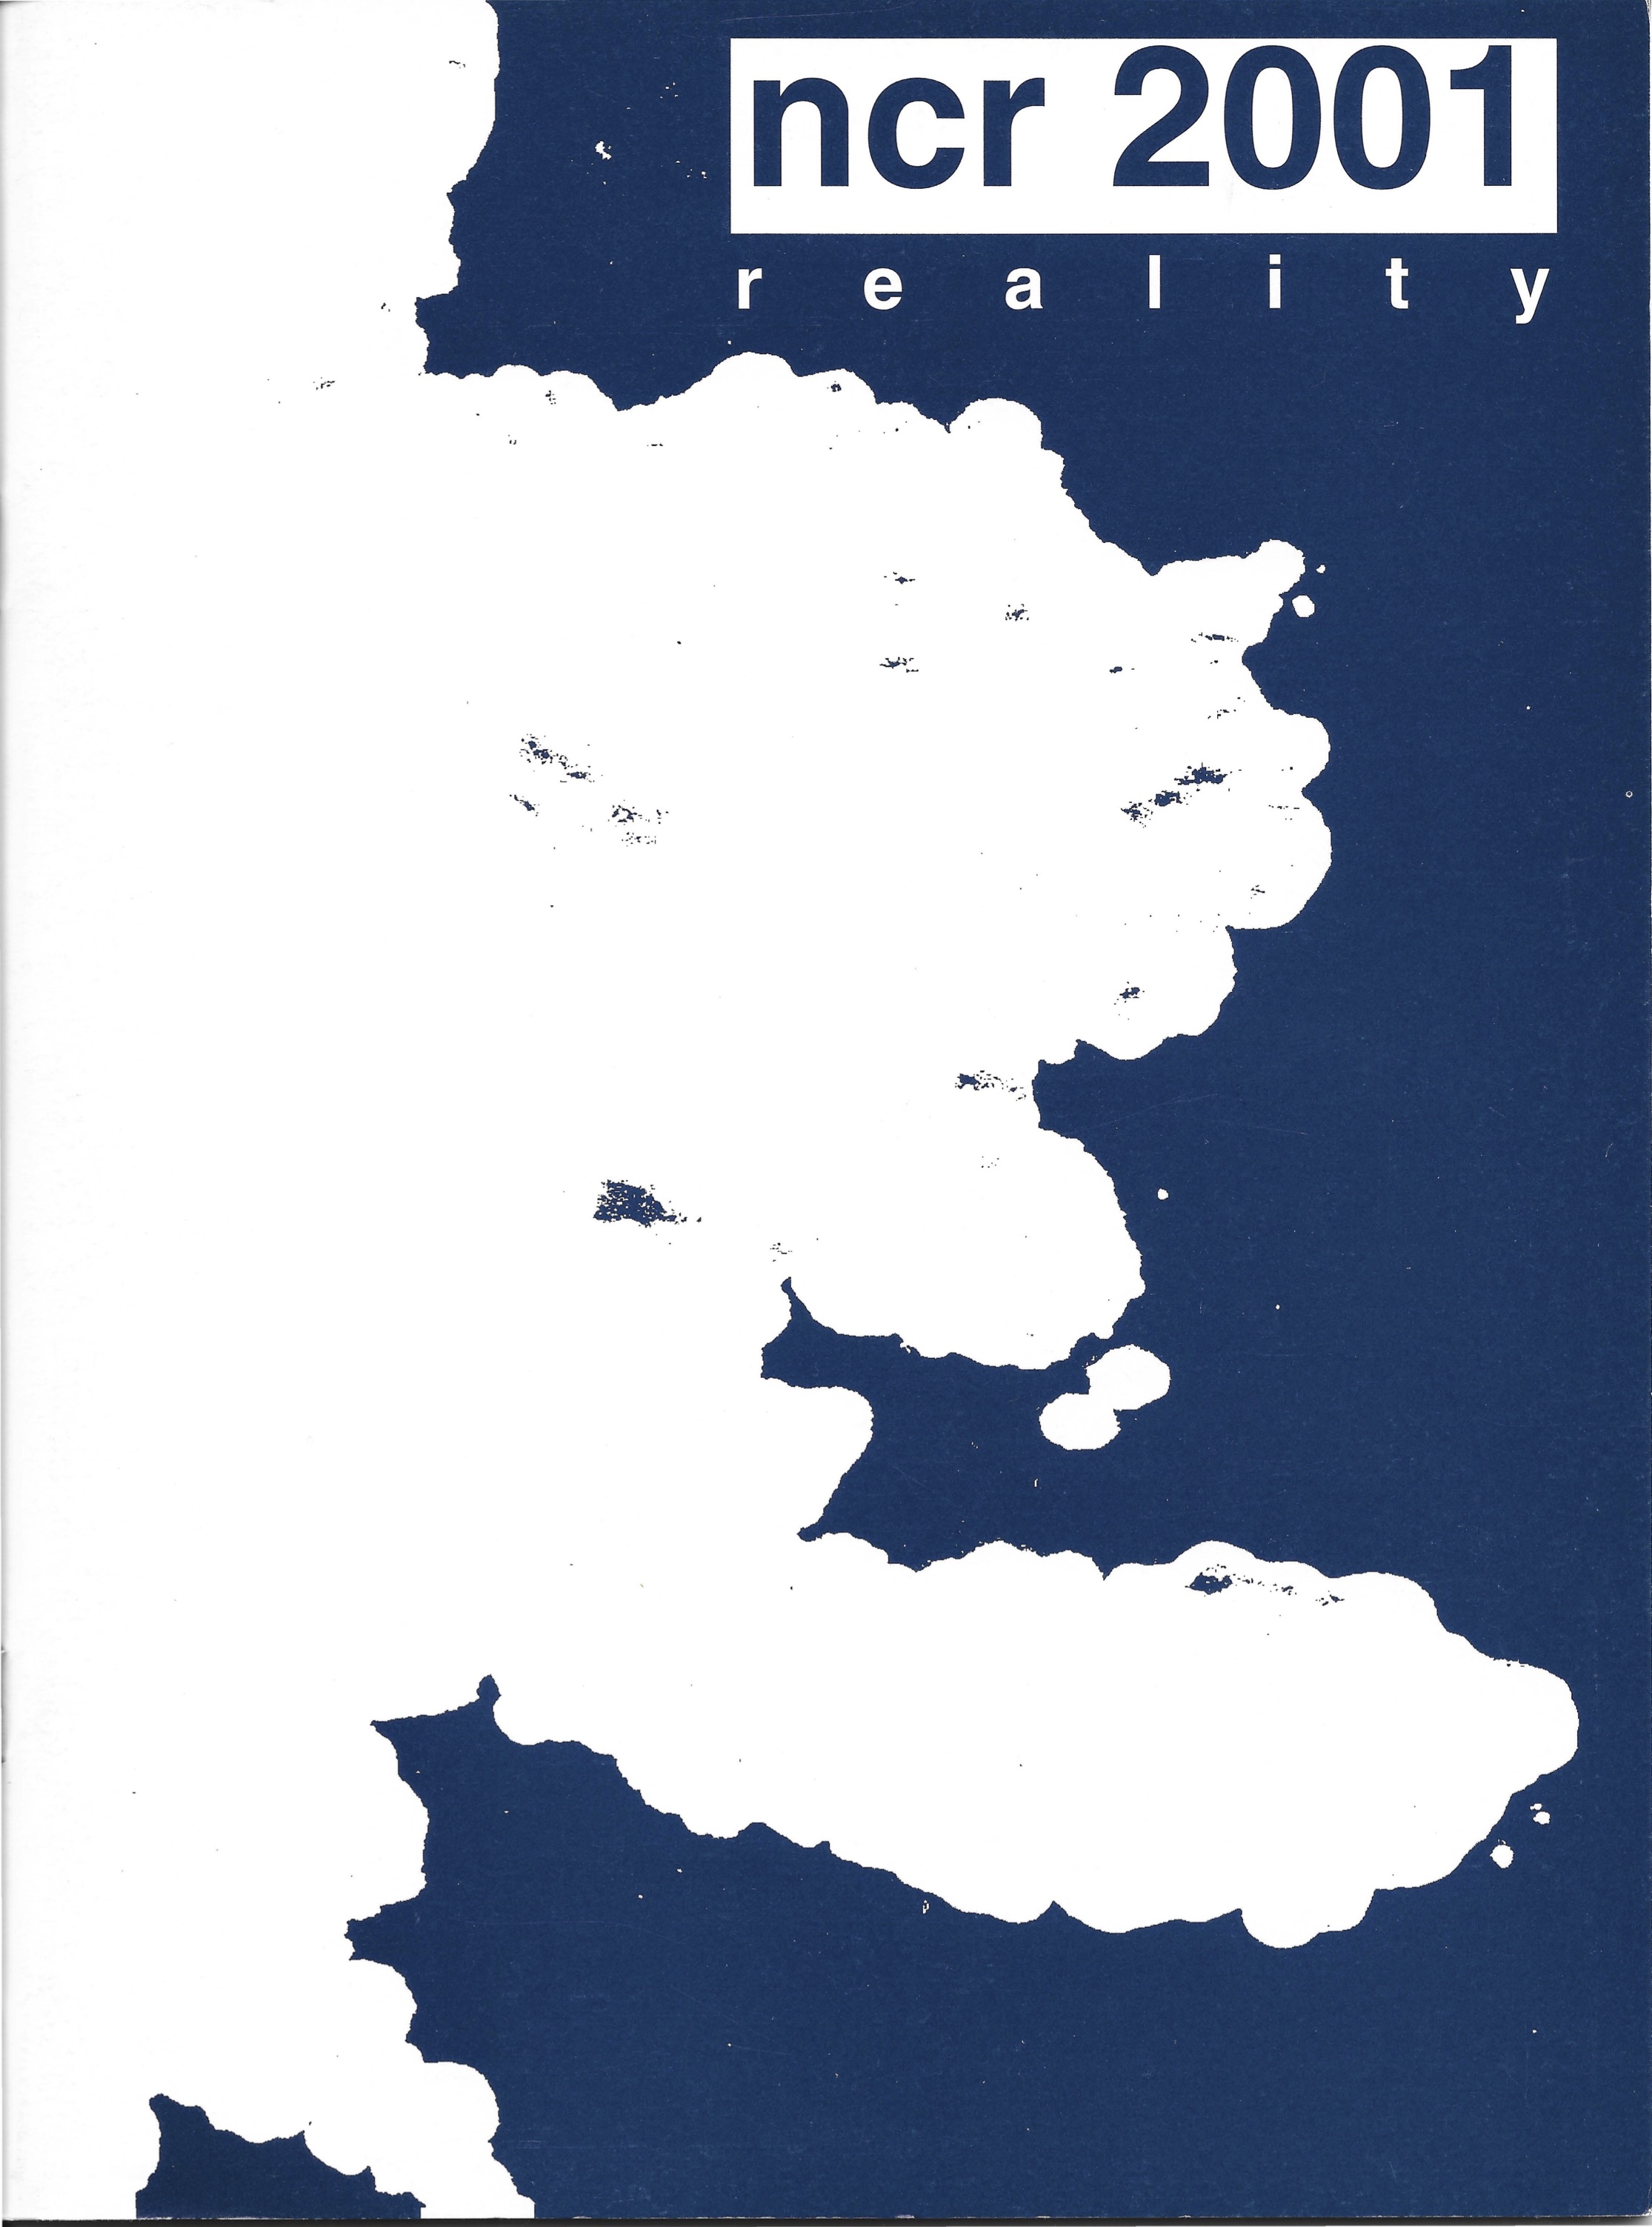 Cover of New College Review issue from 2001 titled Reality